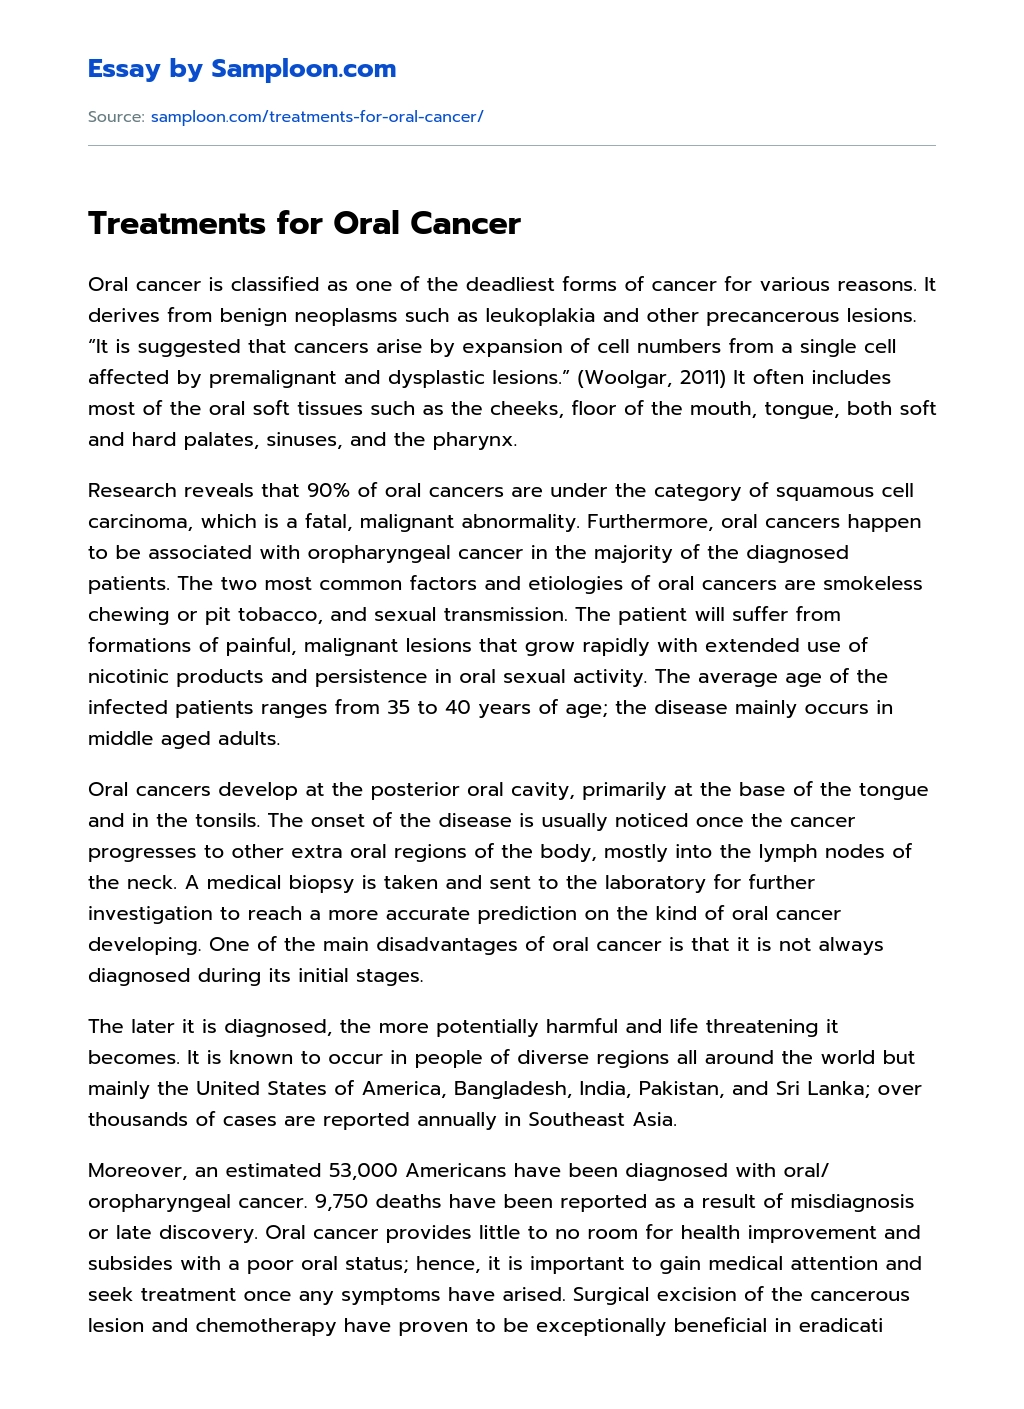 Treatments for Oral Cancer essay